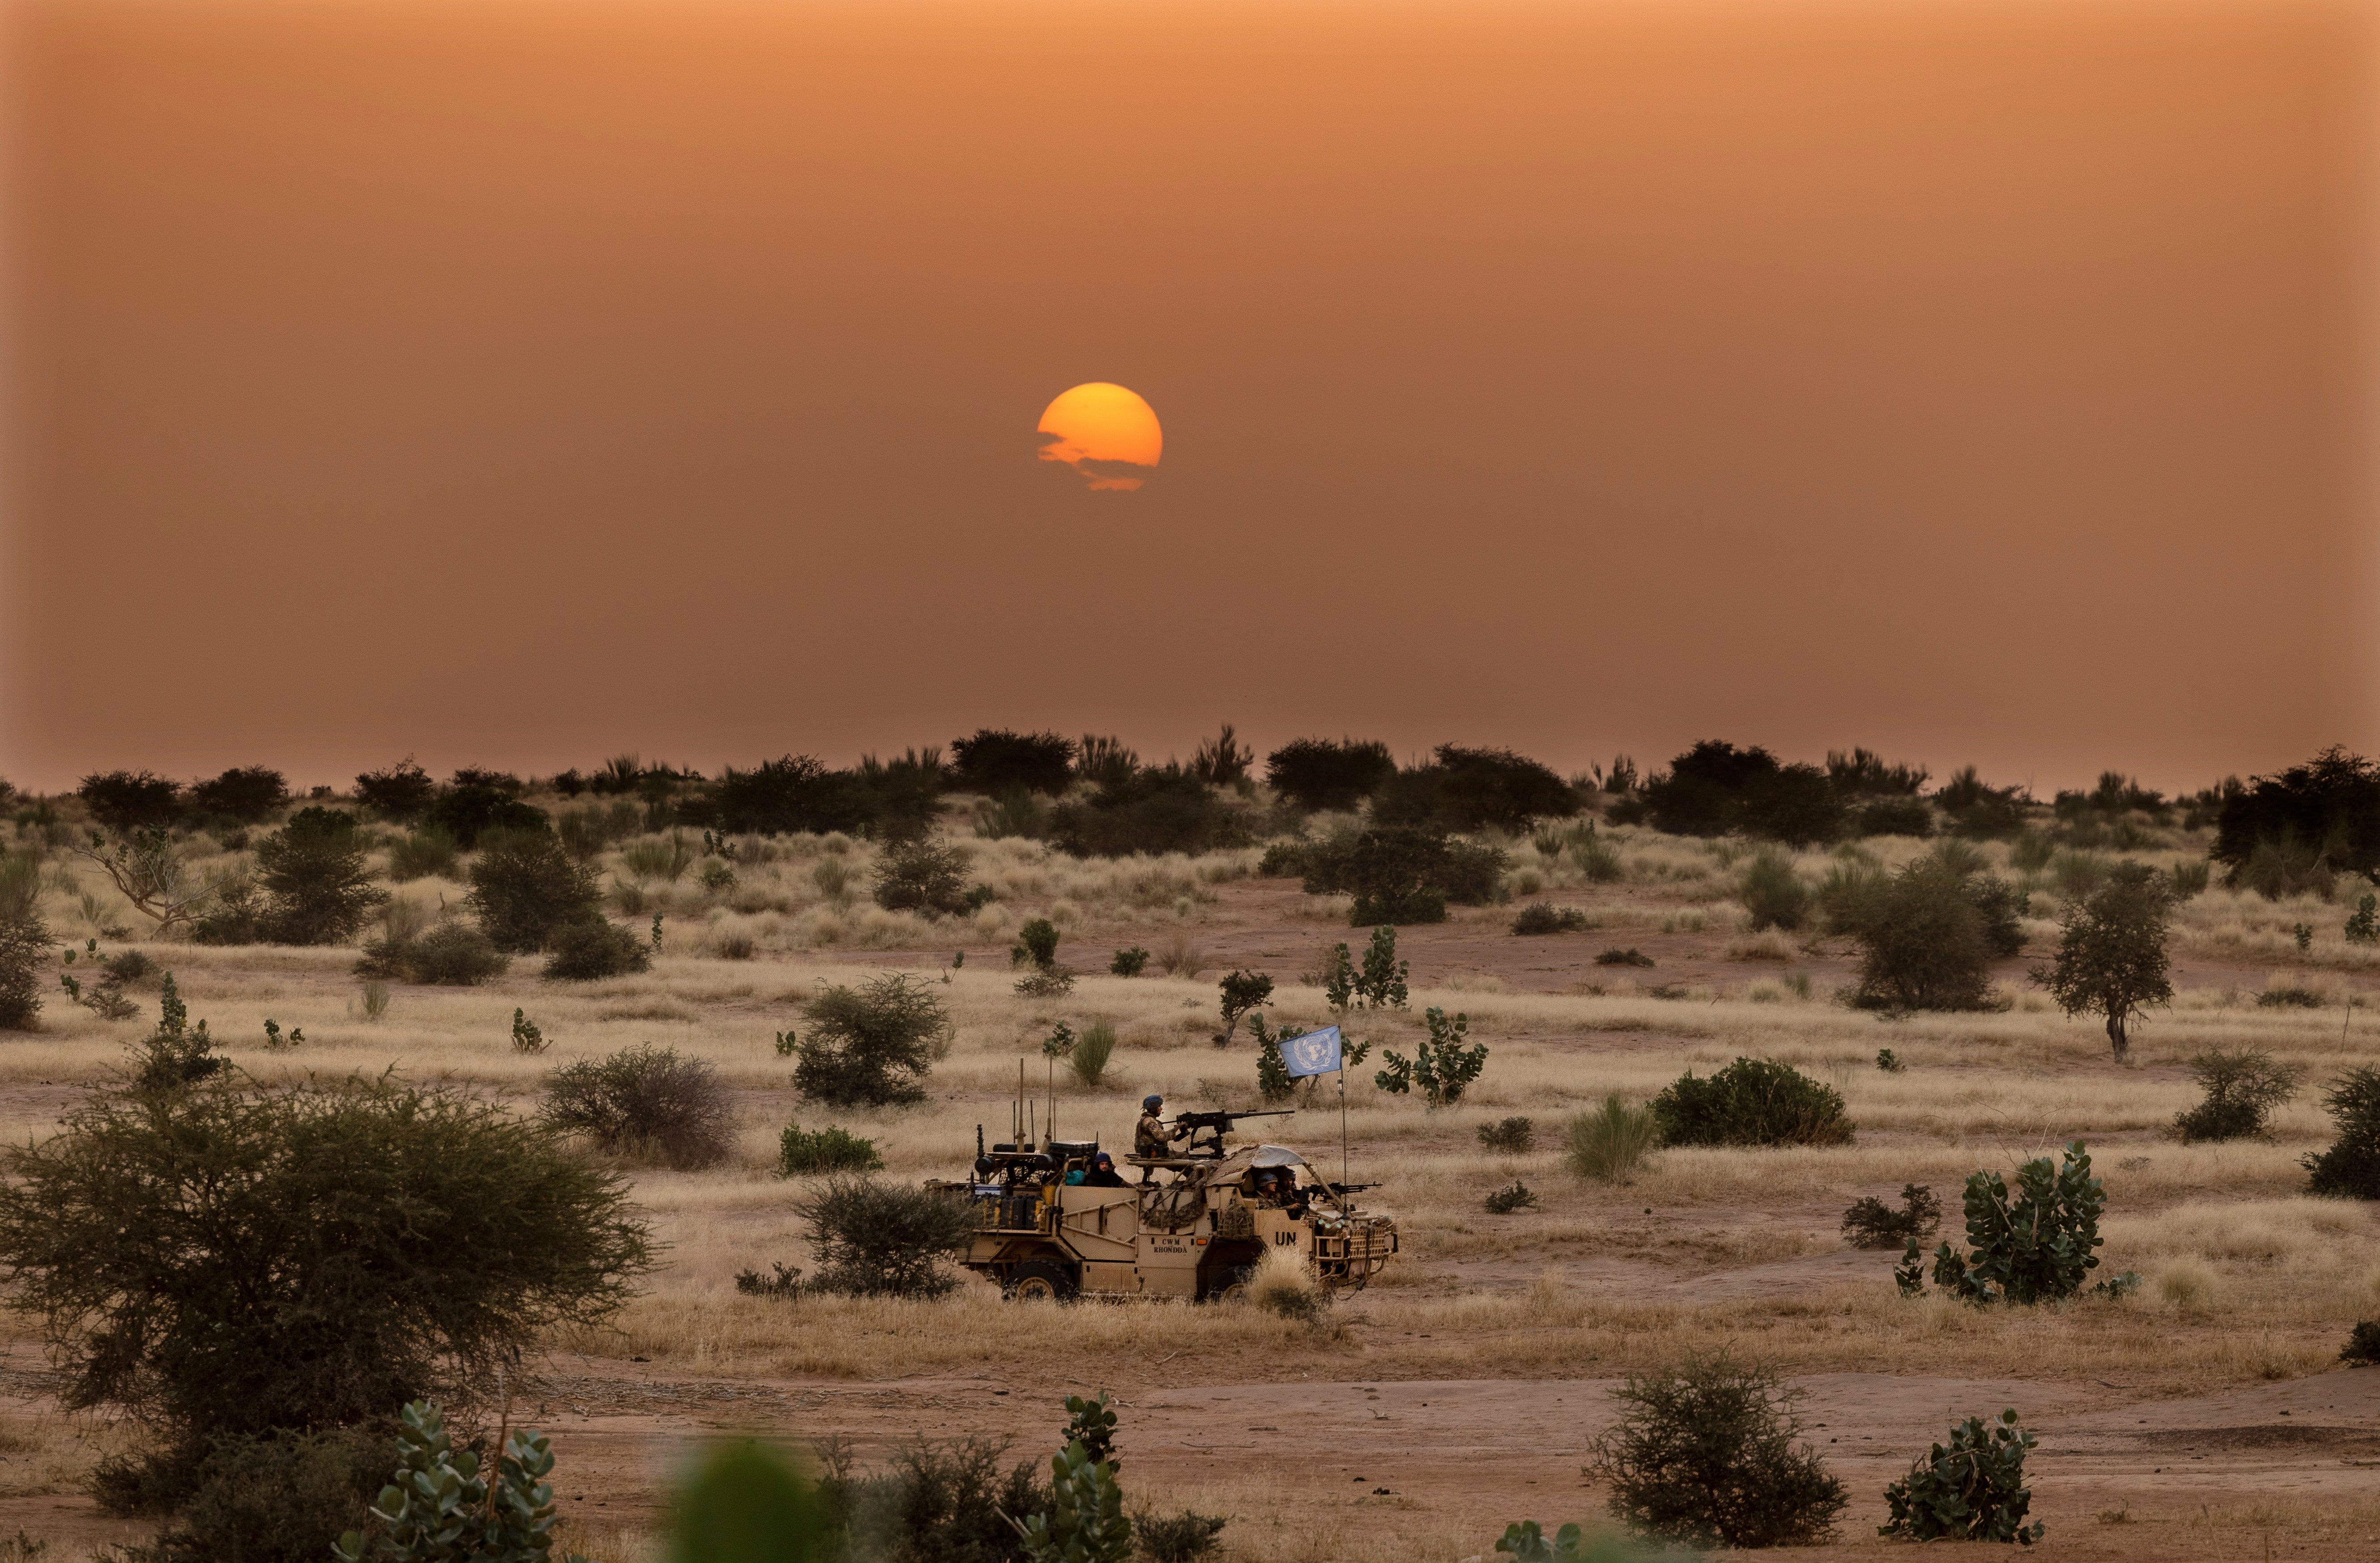 British troops from the 2nd Battalion Royal Anglian Regiment and the Queen’s Dragoon Guards operating as part of the UN-led Long Range Recognissance Group in Mali